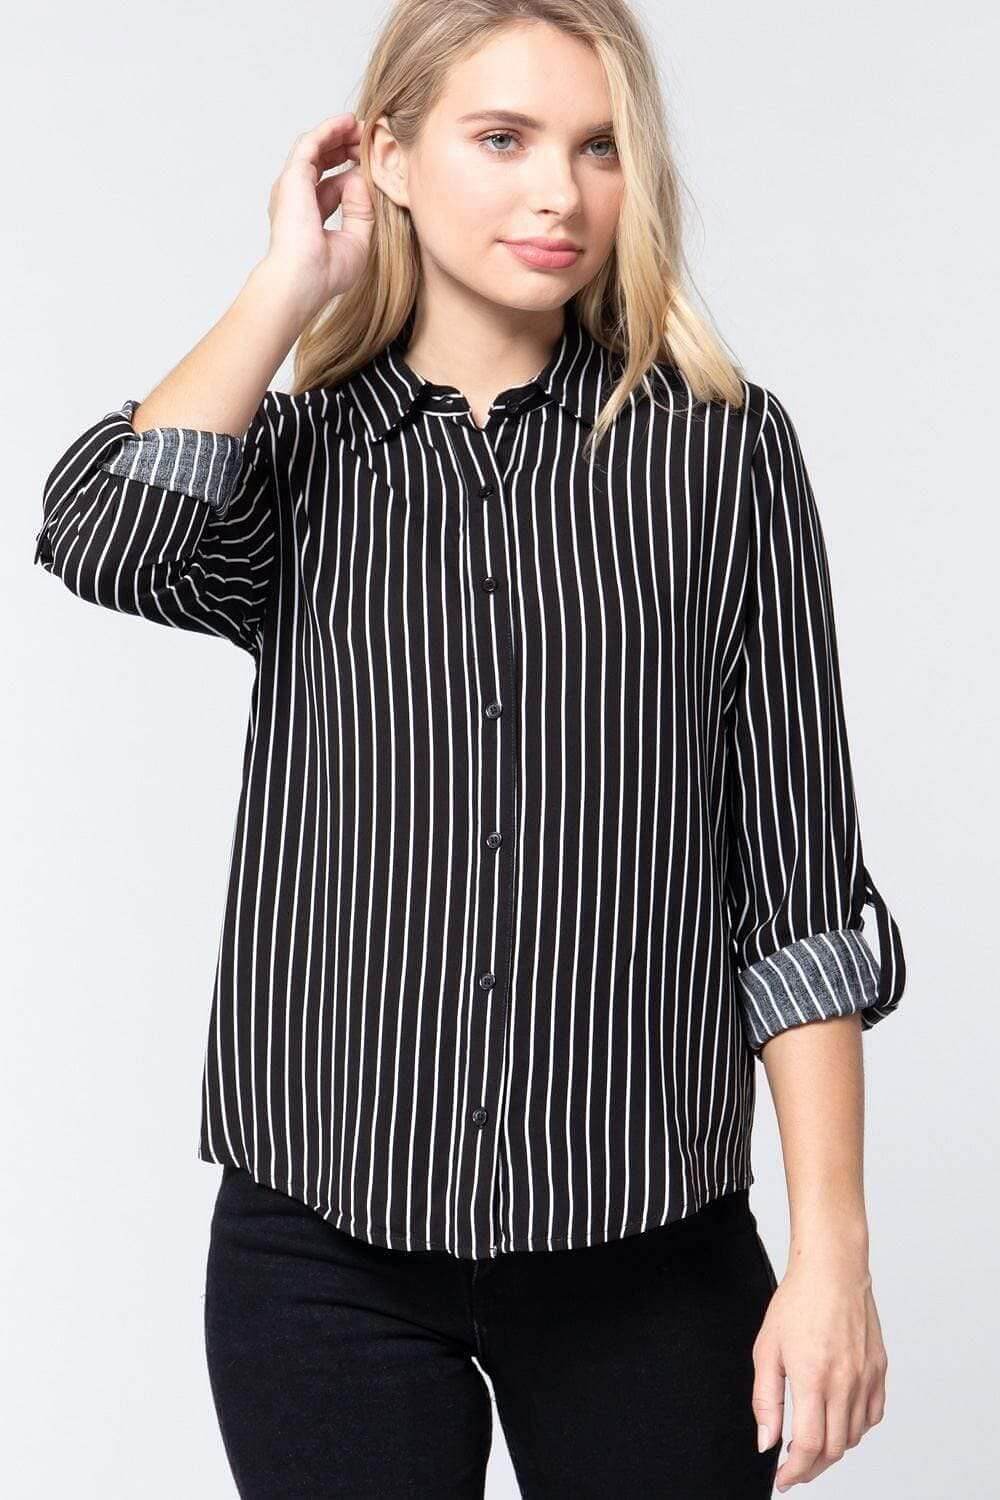 Black-White Roll Up Long Sleeve Stripe Shirt - Shopping Therapy L Shirts & Tops